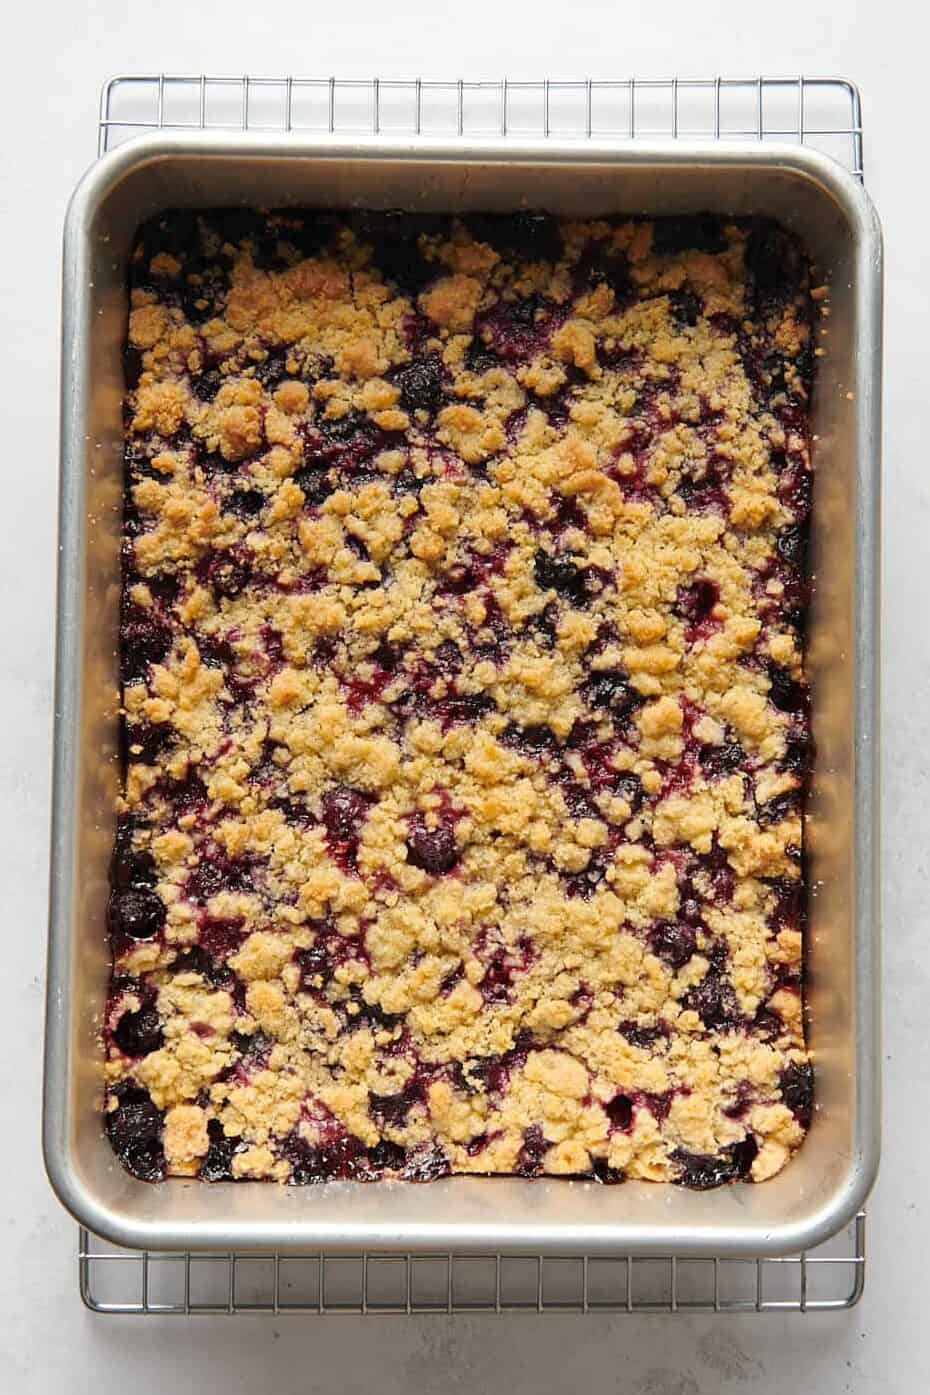 baked blueberry crumble in a 9x13 baking dish